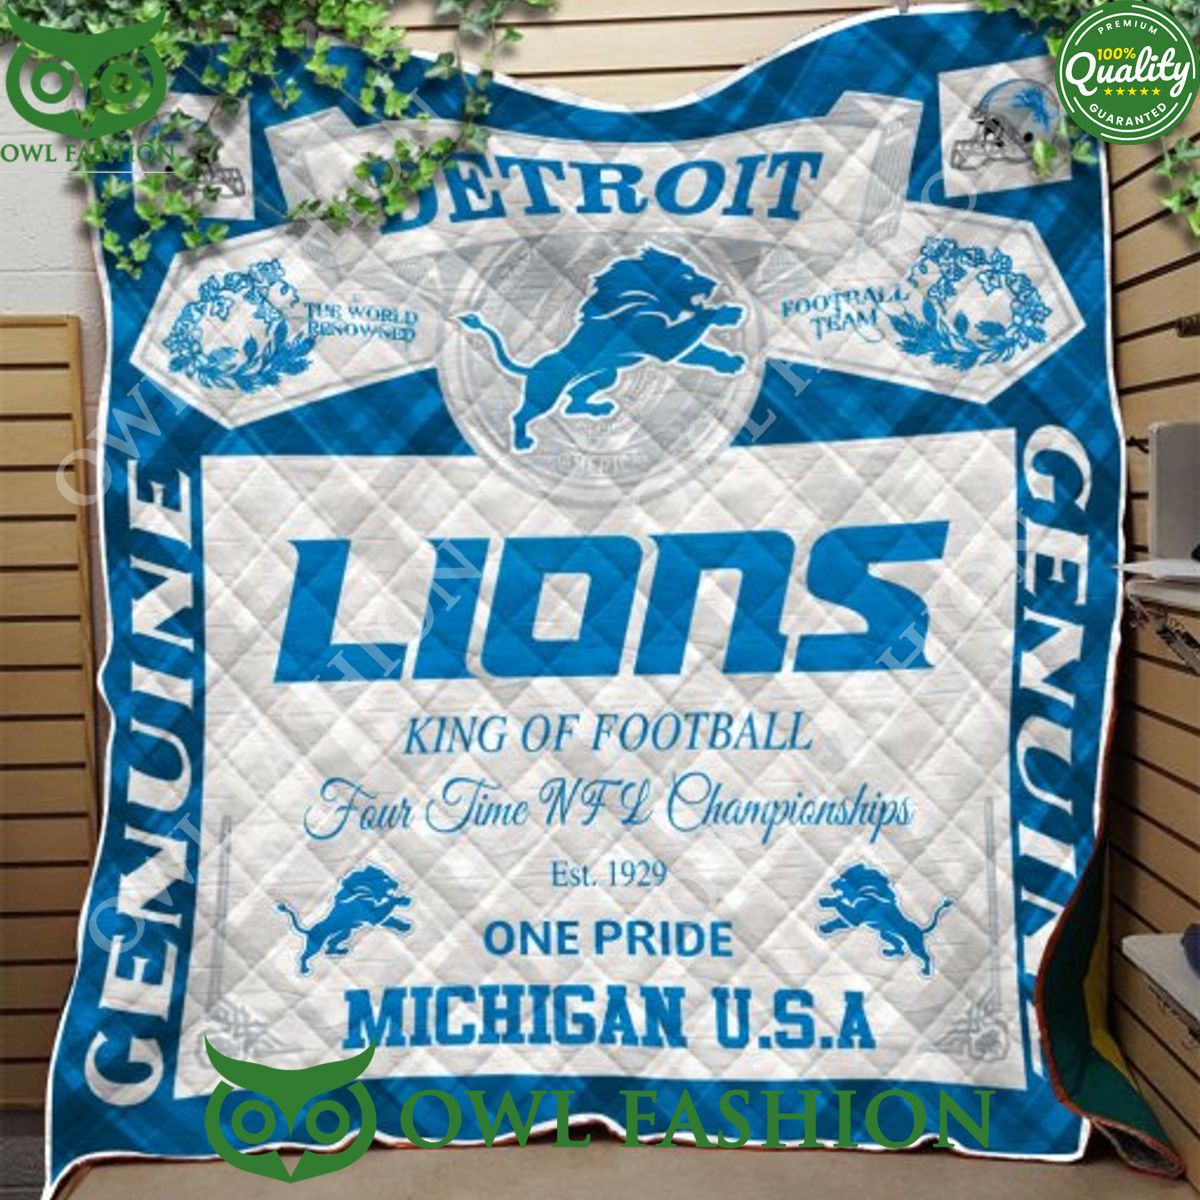 NFL Super Bowl Champions 4 times Detroit Lions King Of Football Quilt Blanket